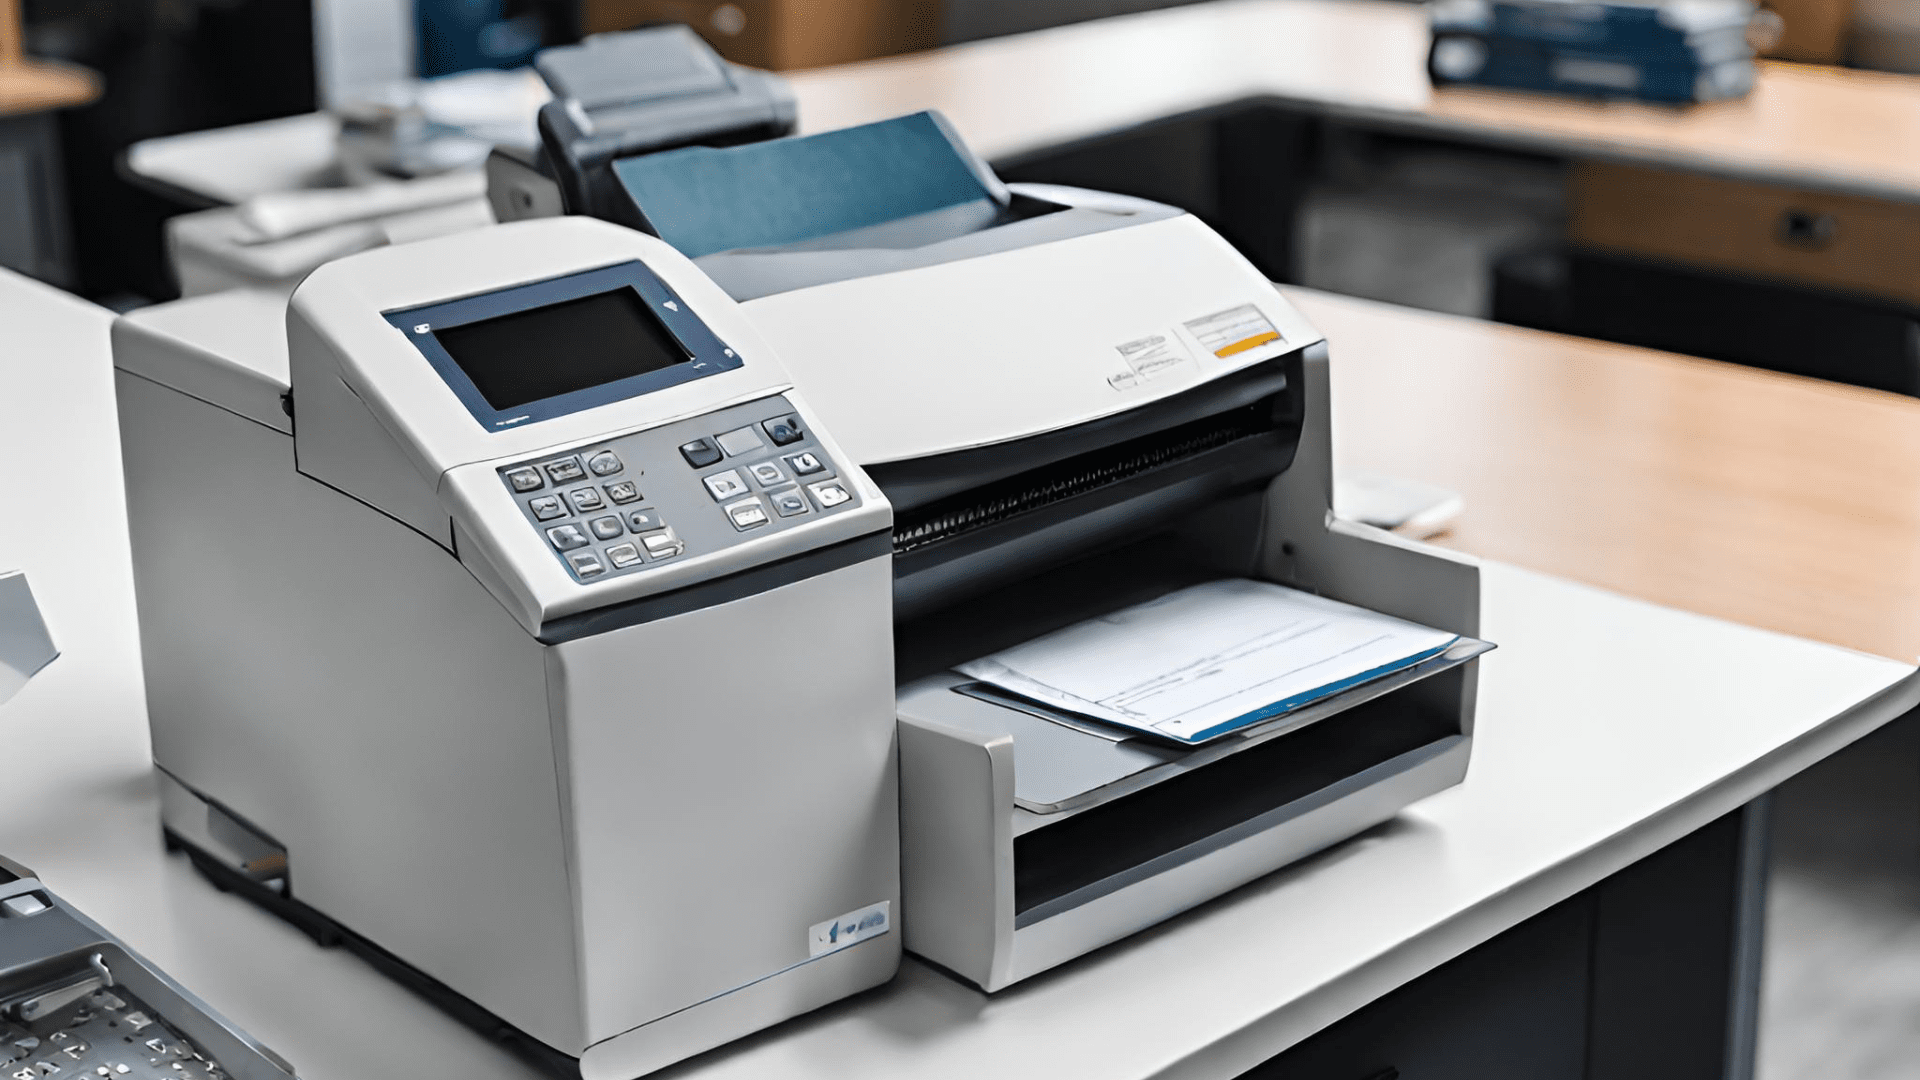 Franking machine on a office table